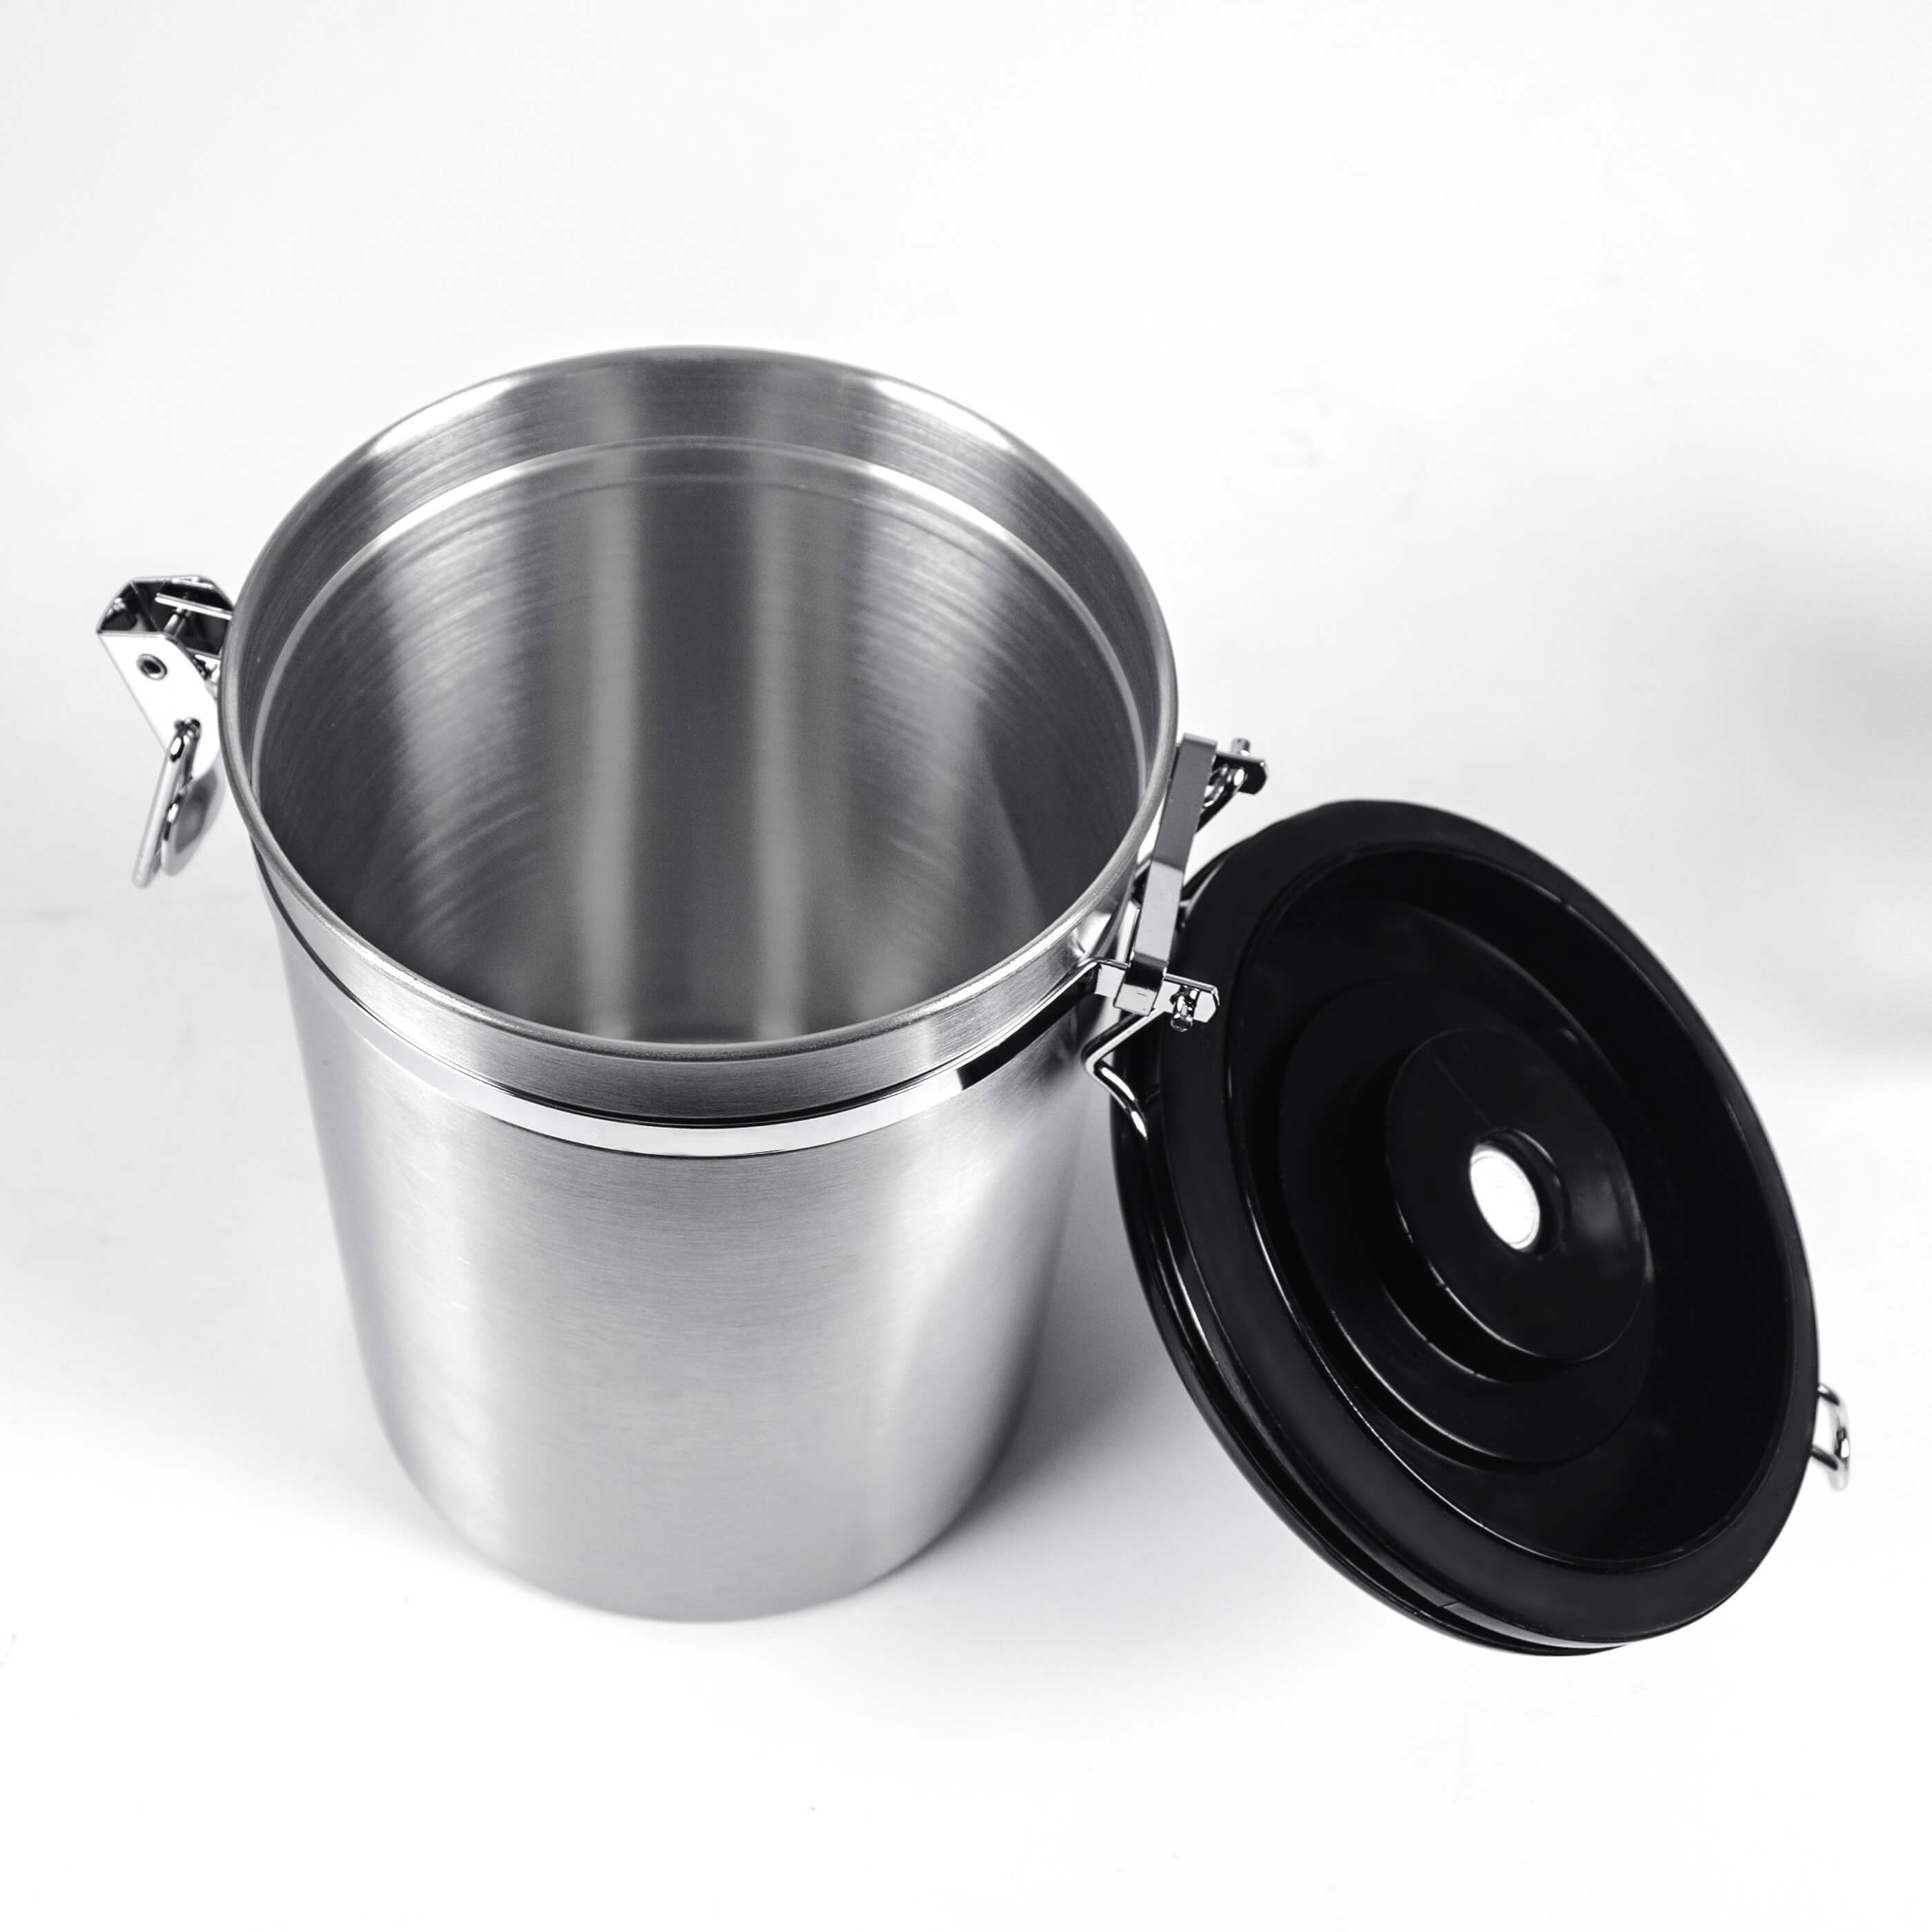 Stainless Steel Gooseneck Kettle 1.2L - Kitchables